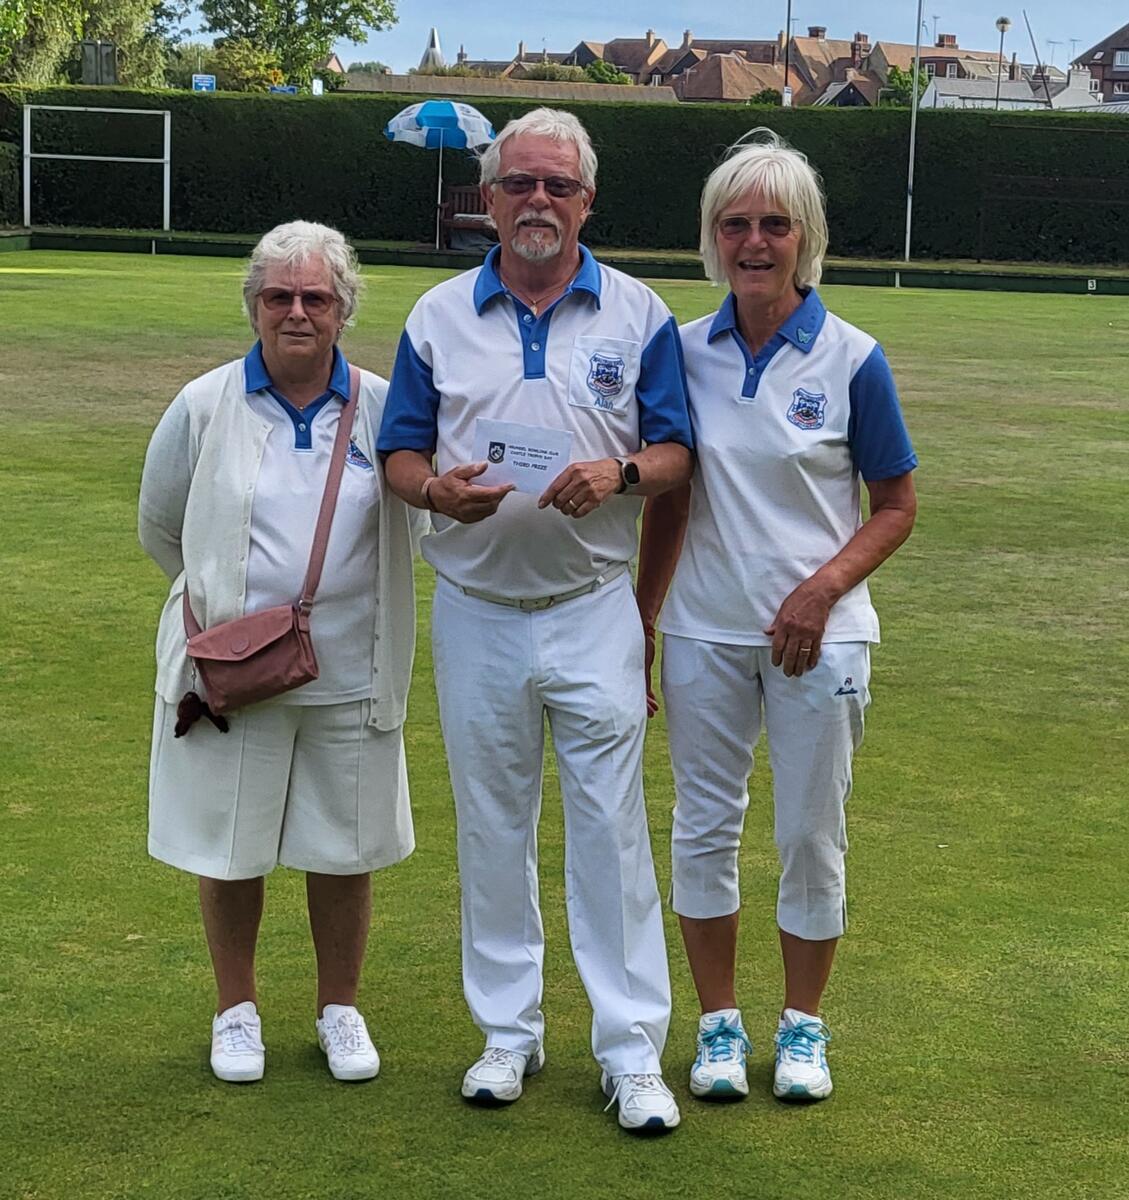 Alan Howe, Sue Dyball and Maz Howe, Runners-up of Group 2 and overall 3rd in the Tournament